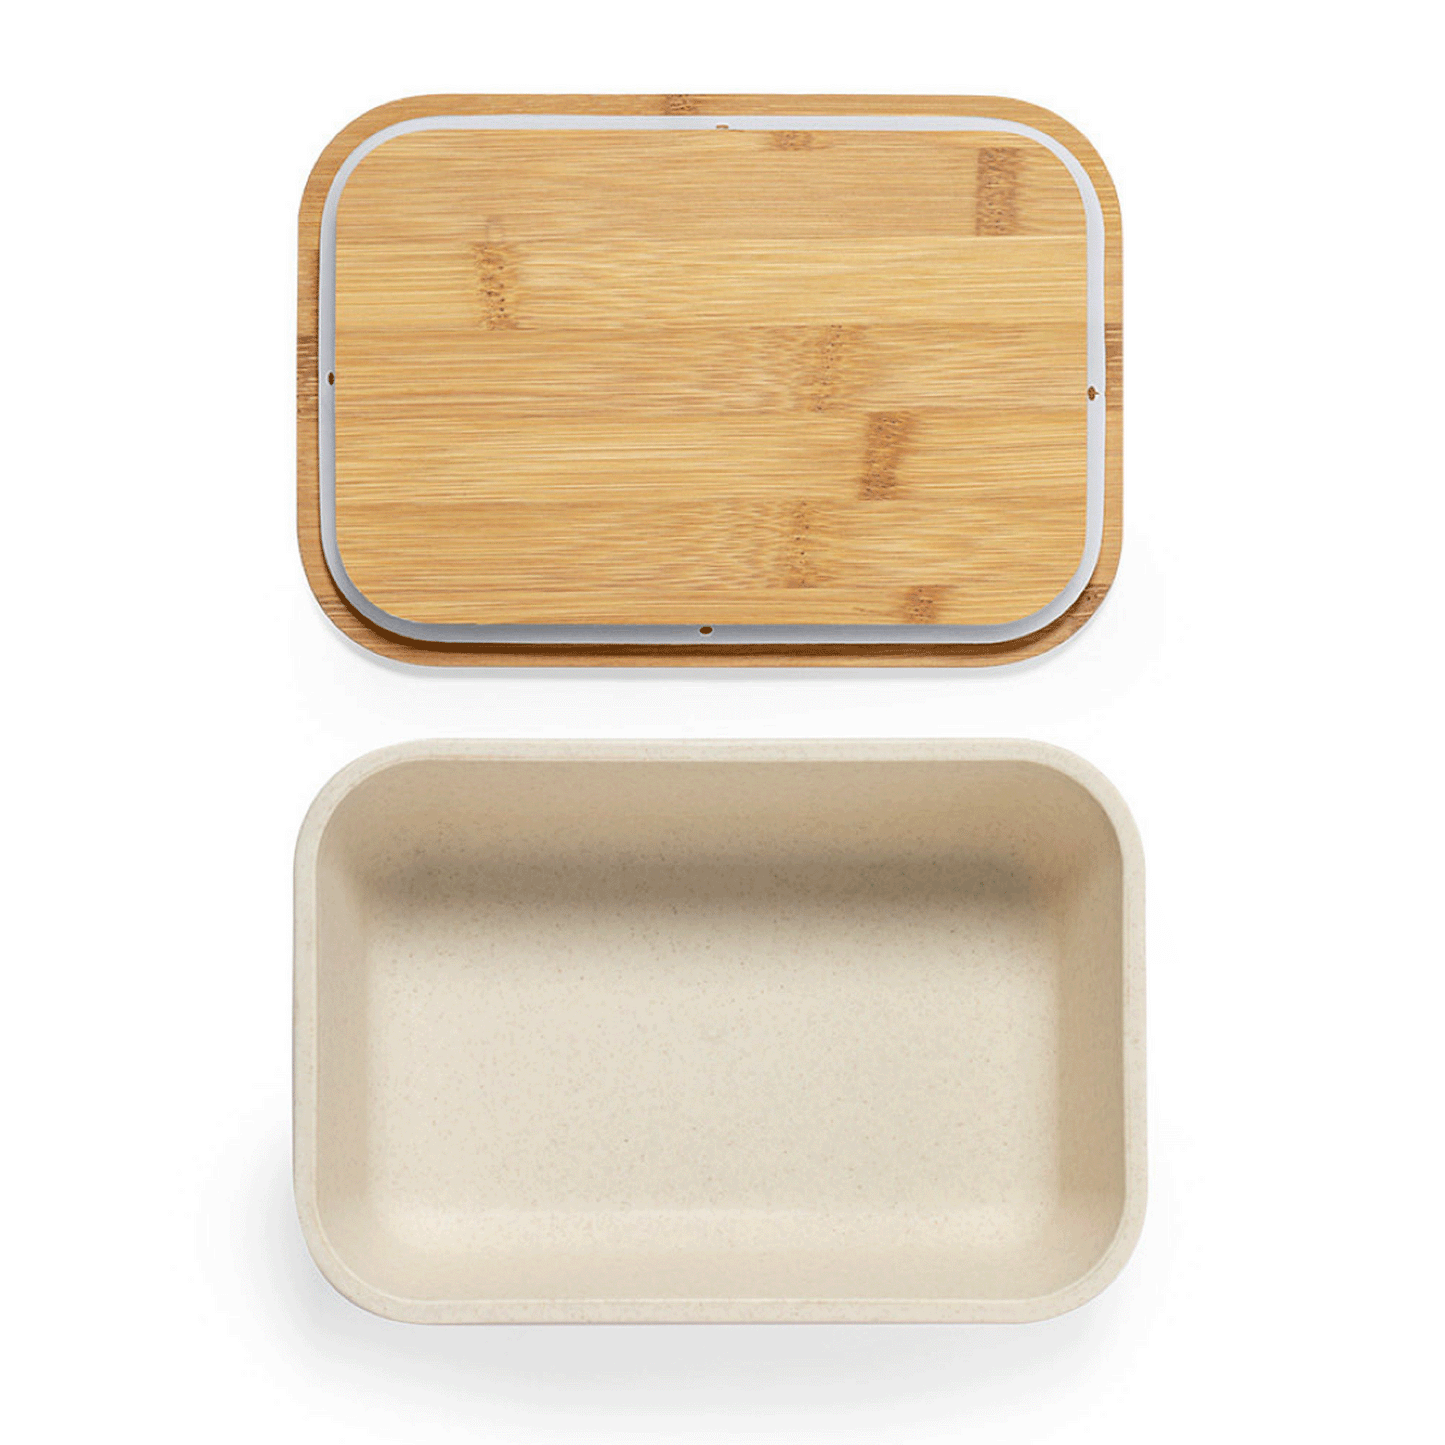 FOOD BOX Material: PP without BPA and bamboo.